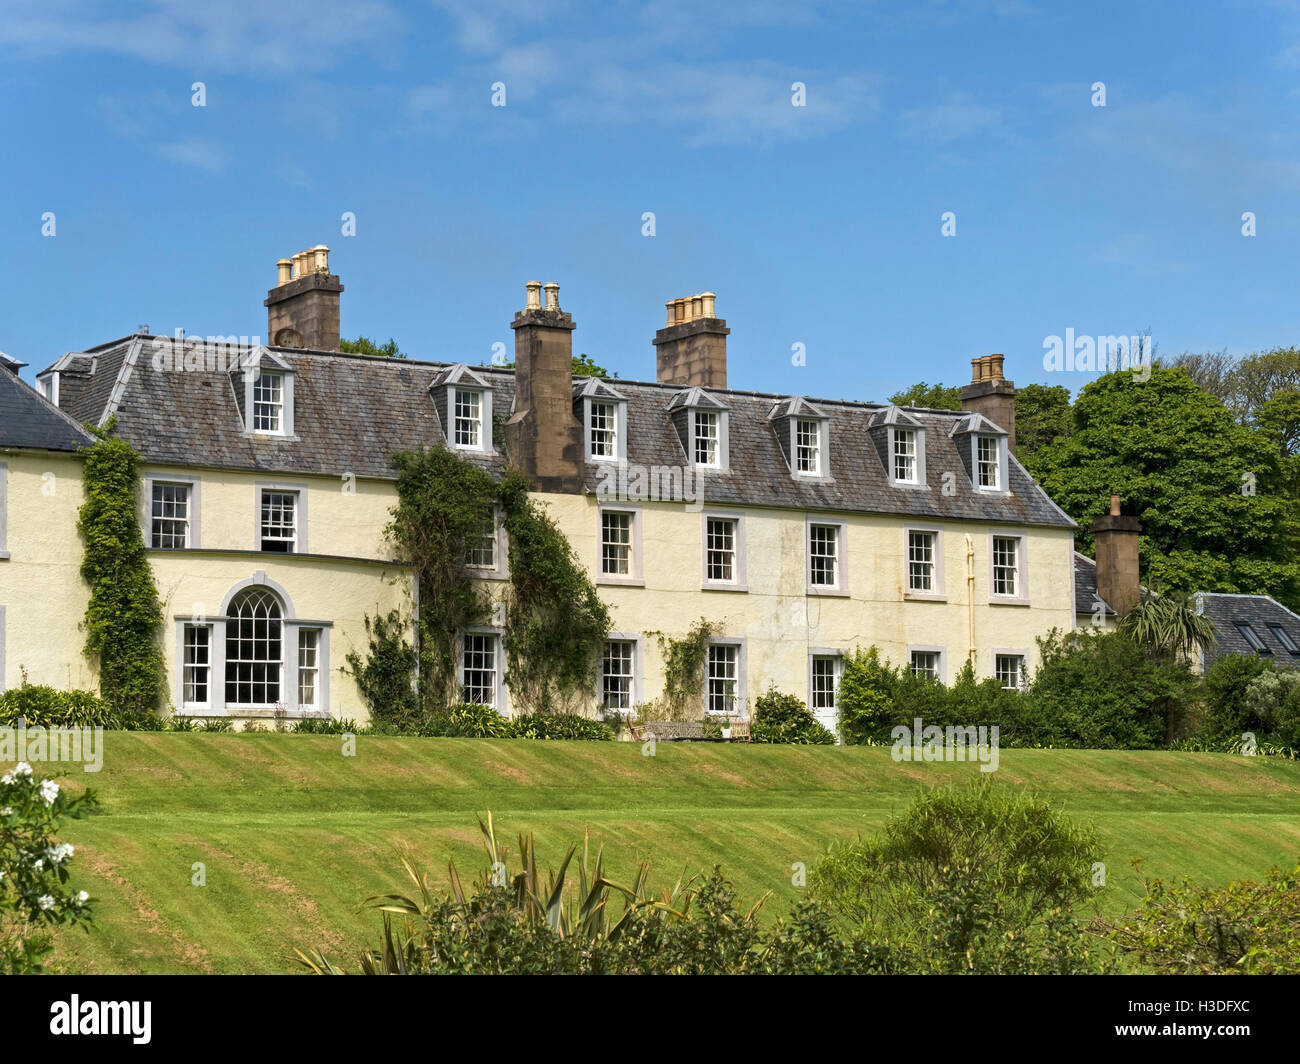 Colonsay House and Gardens, Insel Colonsay, Schottland. Stockfoto